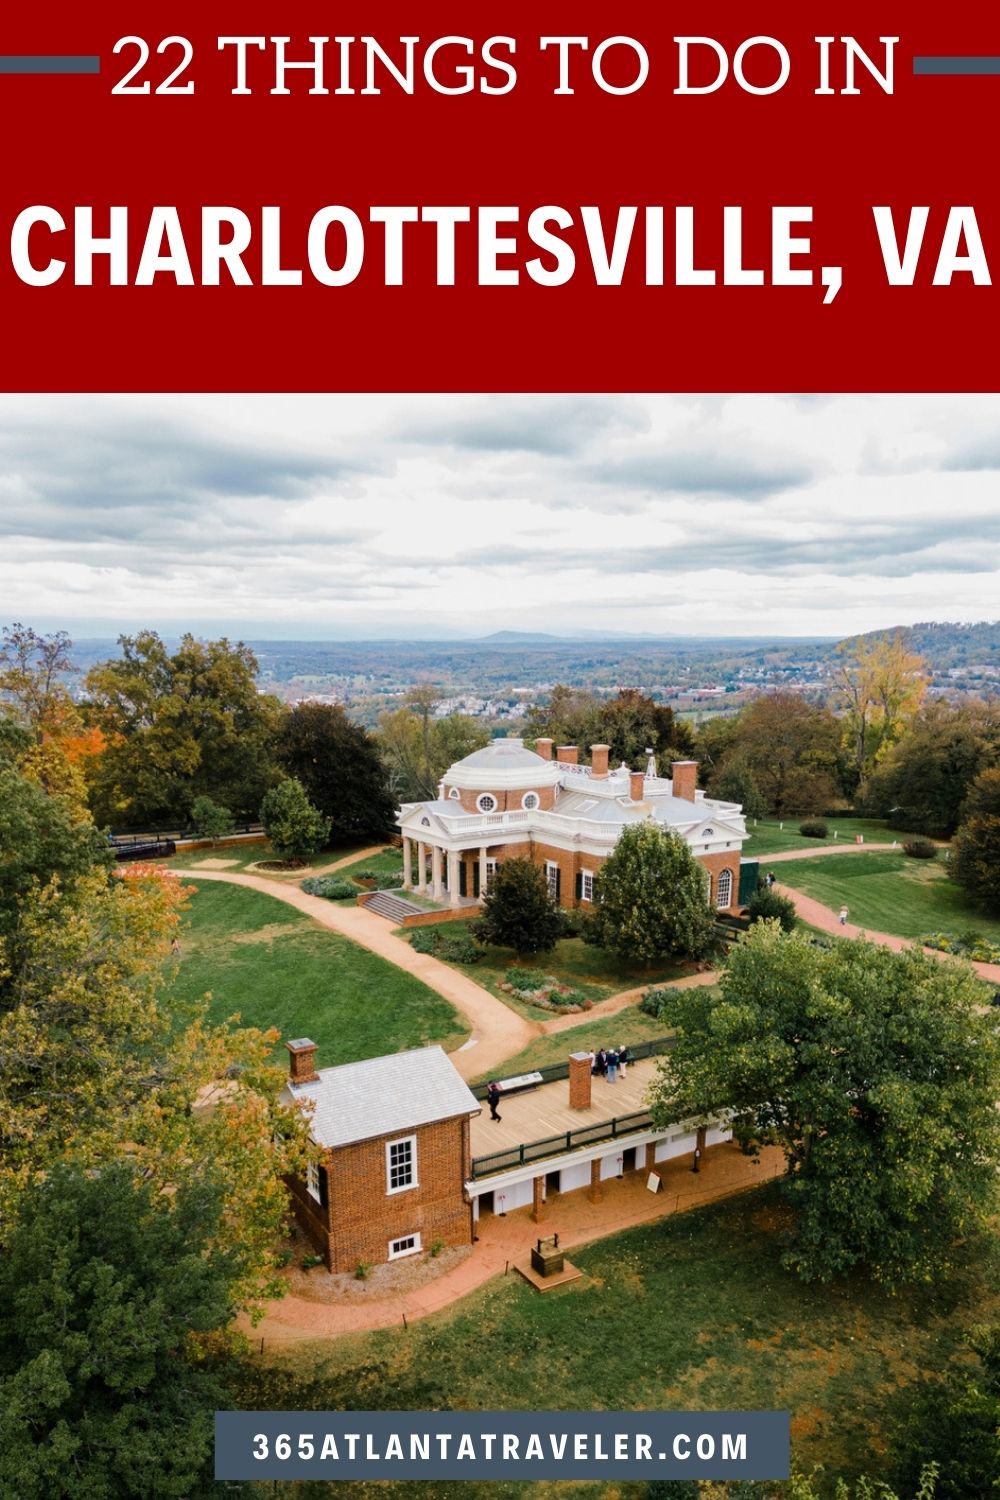 21+ Outstanding Things To Do in Charlottesville VA